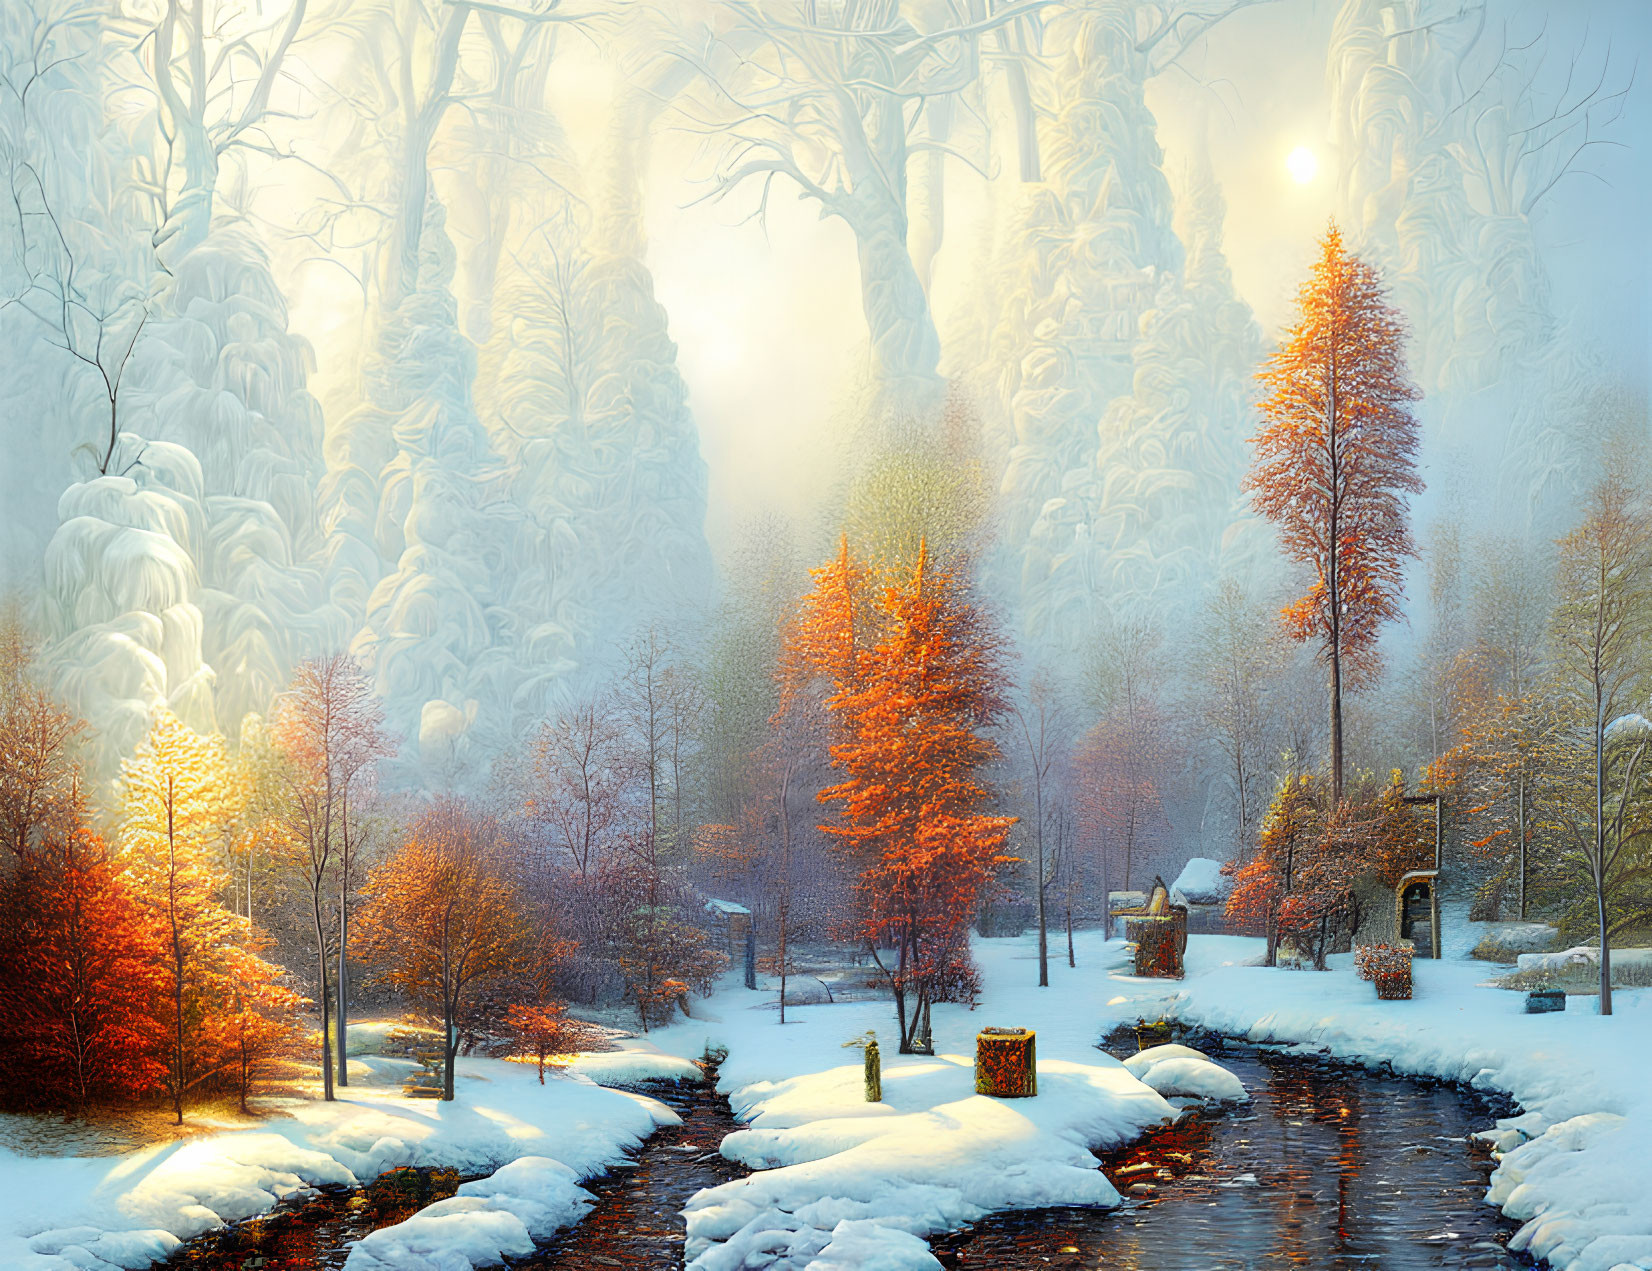 Snow-covered landscape with stream, autumn trees, house, and soft sunlight